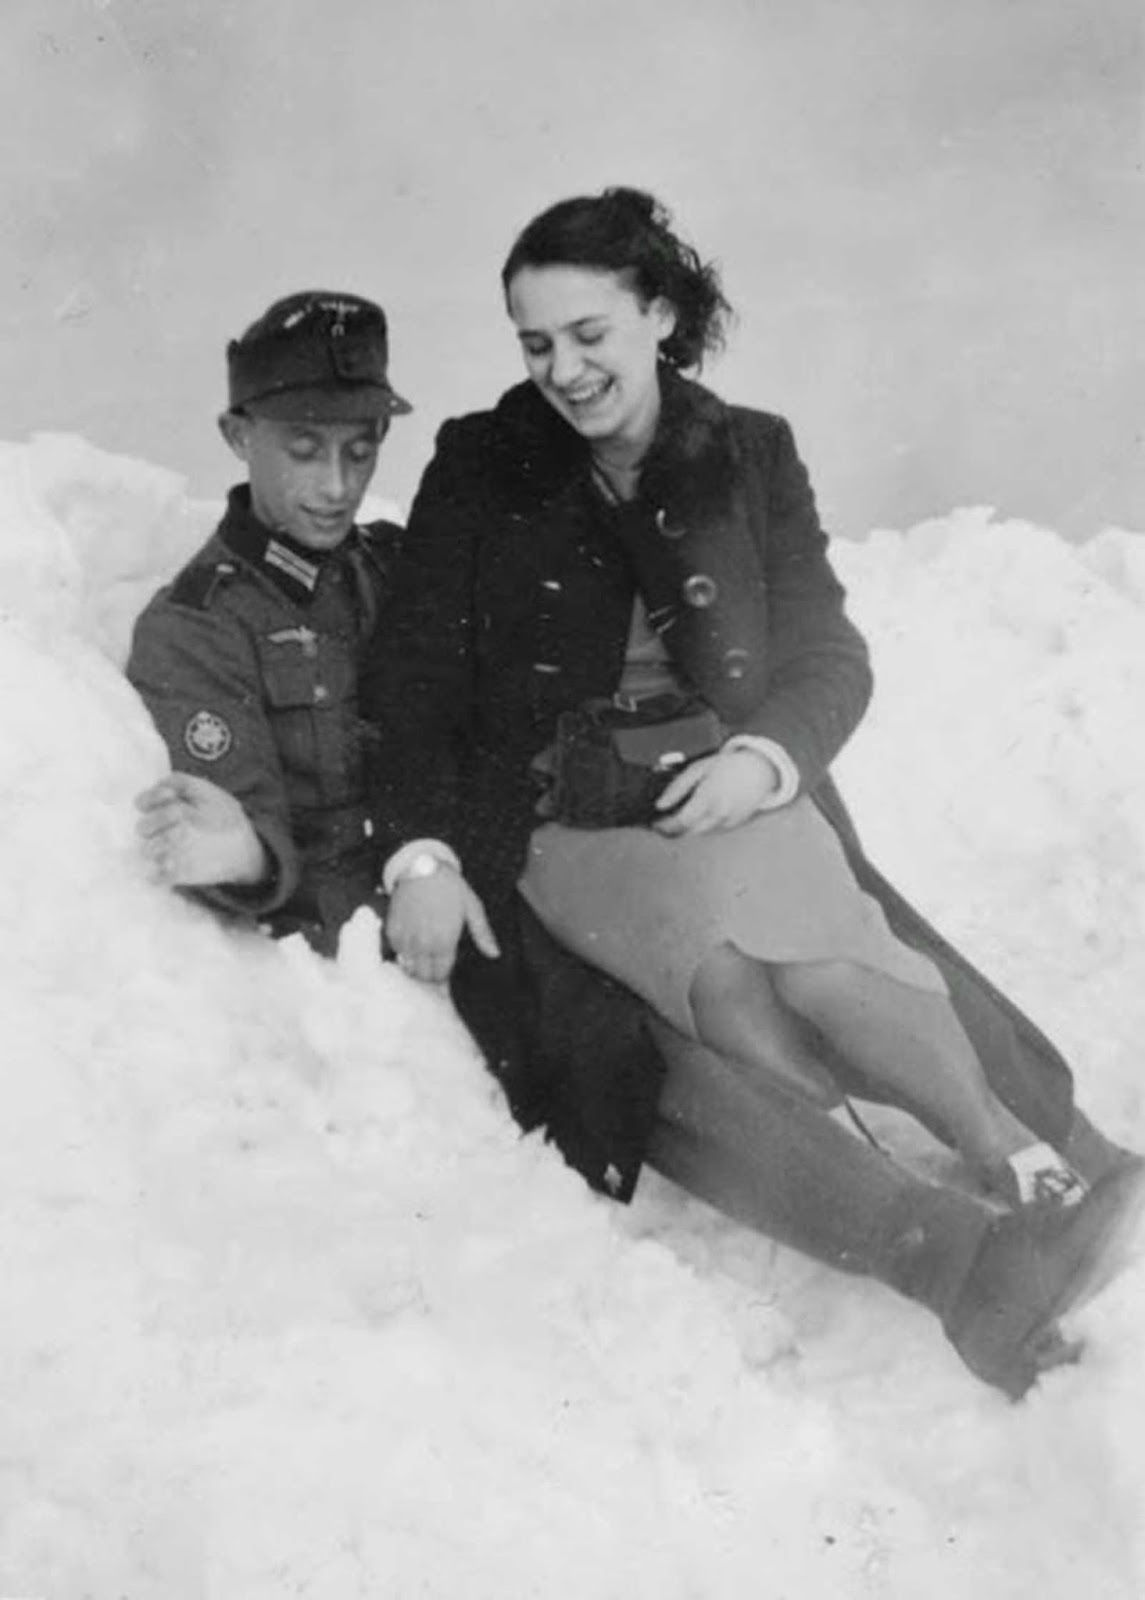 A friendly visit with a Wehrmacht Gebirgsjager (mountain) Troops private in a snowdrift. She appears to have nylons on, he apparently was quite thoughtful to get them for her - nylons were absolutely cutting edge style in the '40s.